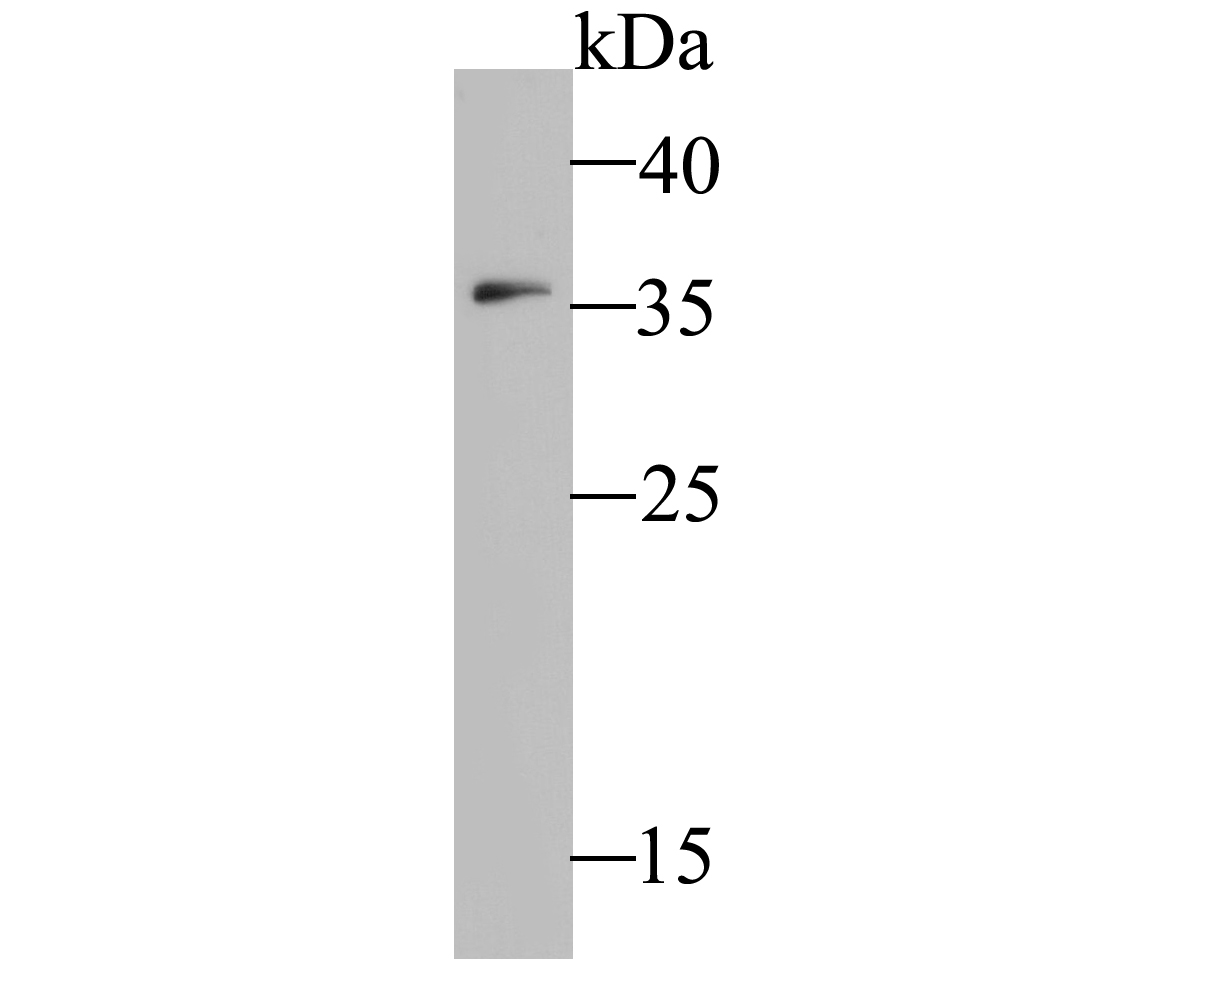 Western blot analysis of IL18 binding protein on K562 cell lysate. Proteins were transferred to a PVDF membrane and blocked with 5% BSA in PBS for 1 hour at room temperature. The primary antibody (ER1902-36, 1/500) was used in 5% BSA at room temperature for 2 hours. Goat Anti-Rabbit IgG - HRP Secondary Antibody (HA1001) at 1:5,000 dilution was used for 1 hour at room temperature.